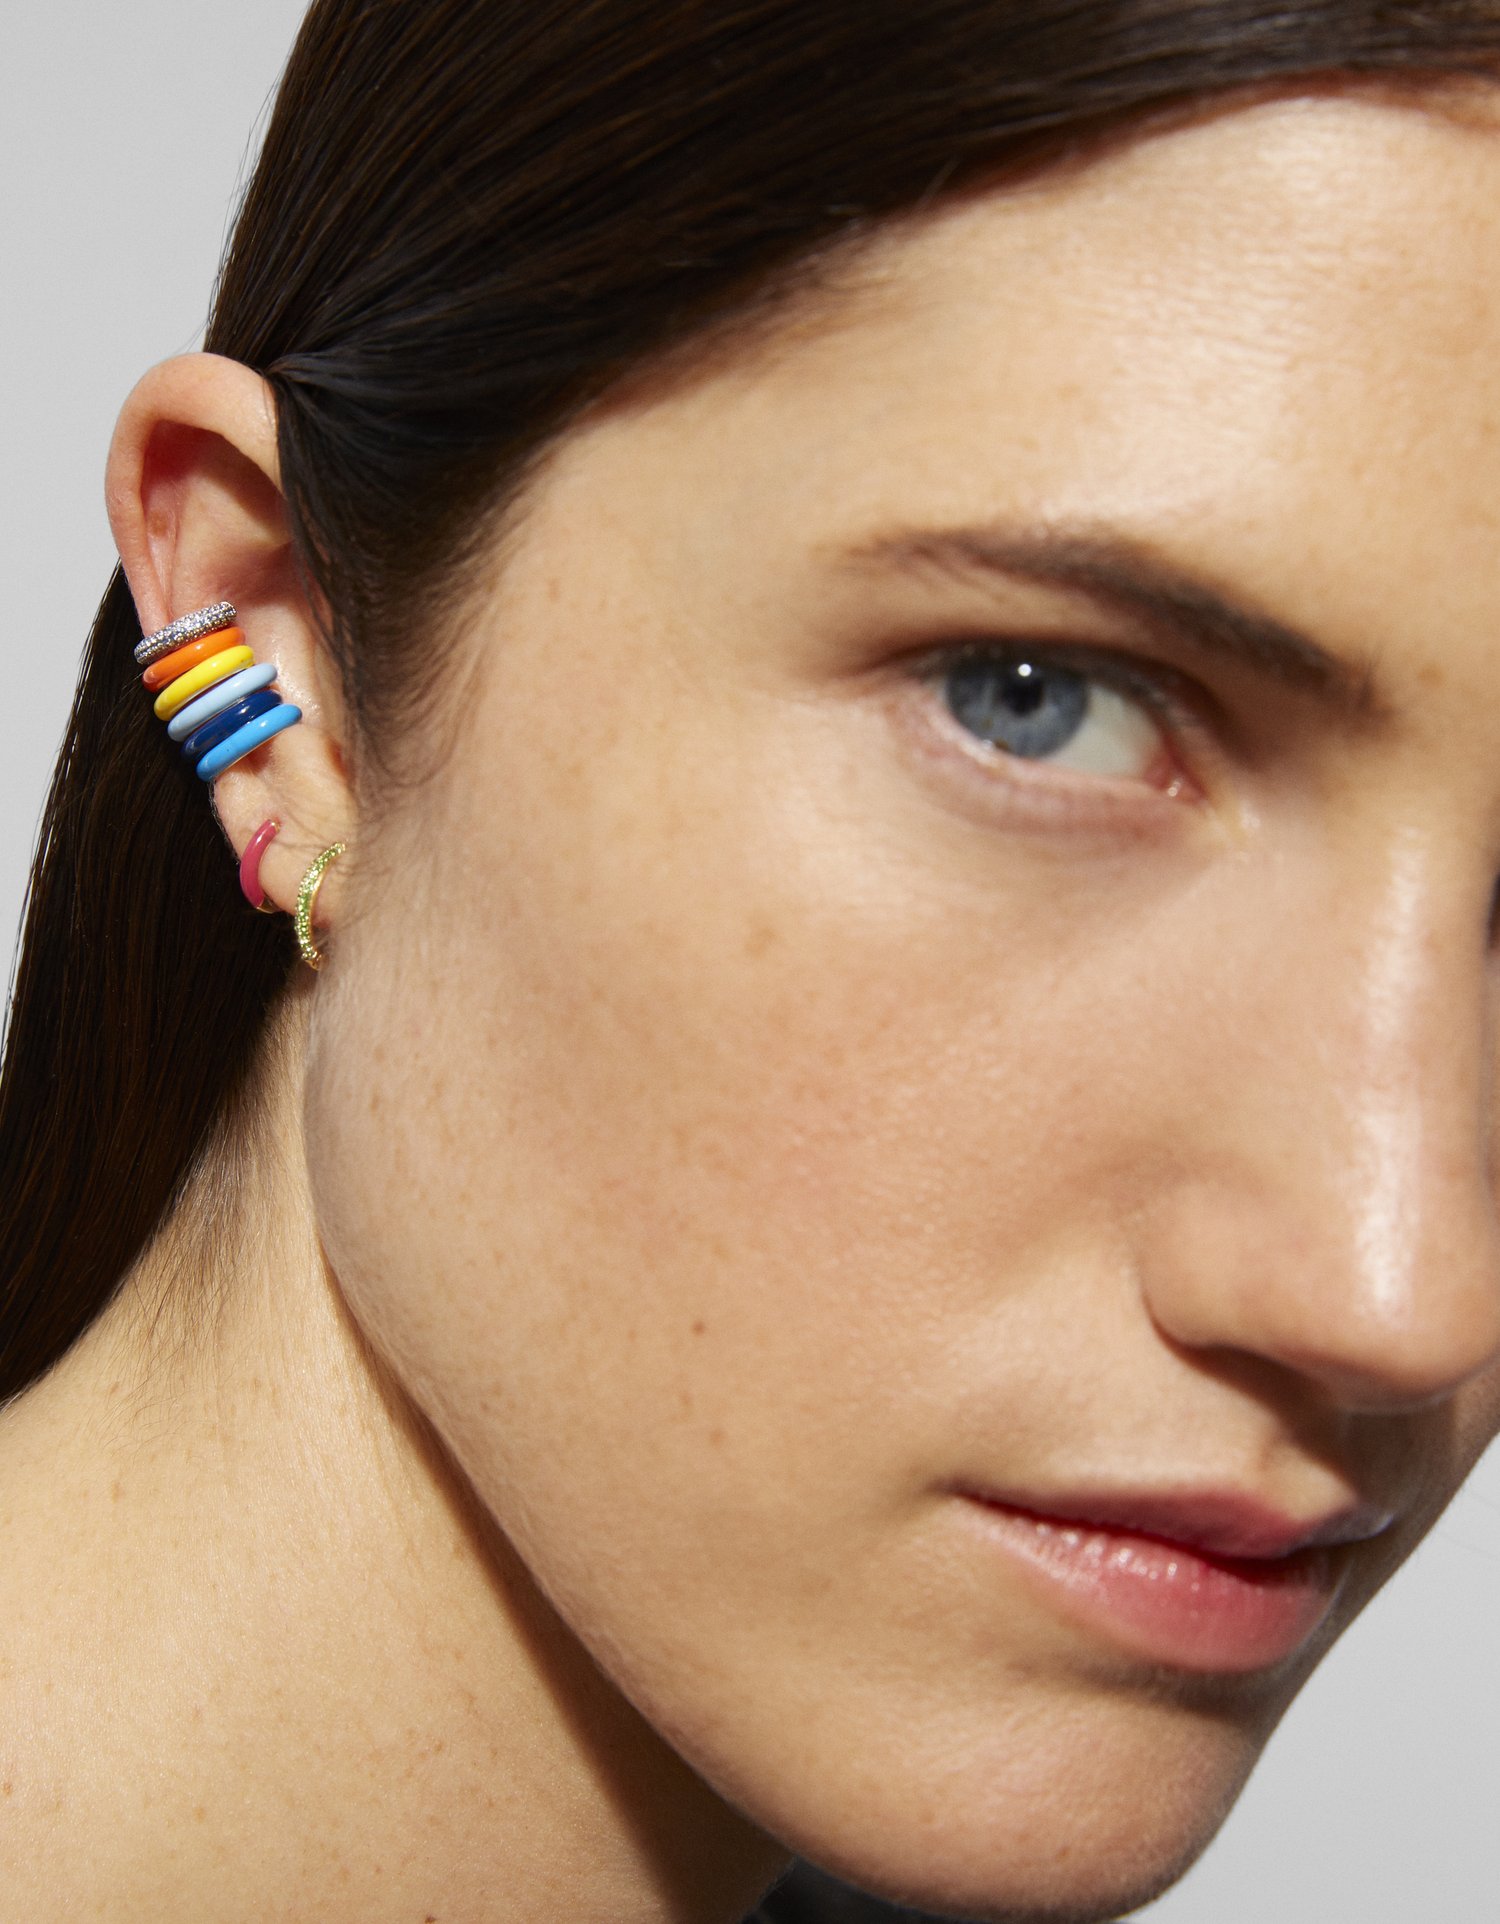 The Enamel Stacking Ear Cuff — FRY POWERS